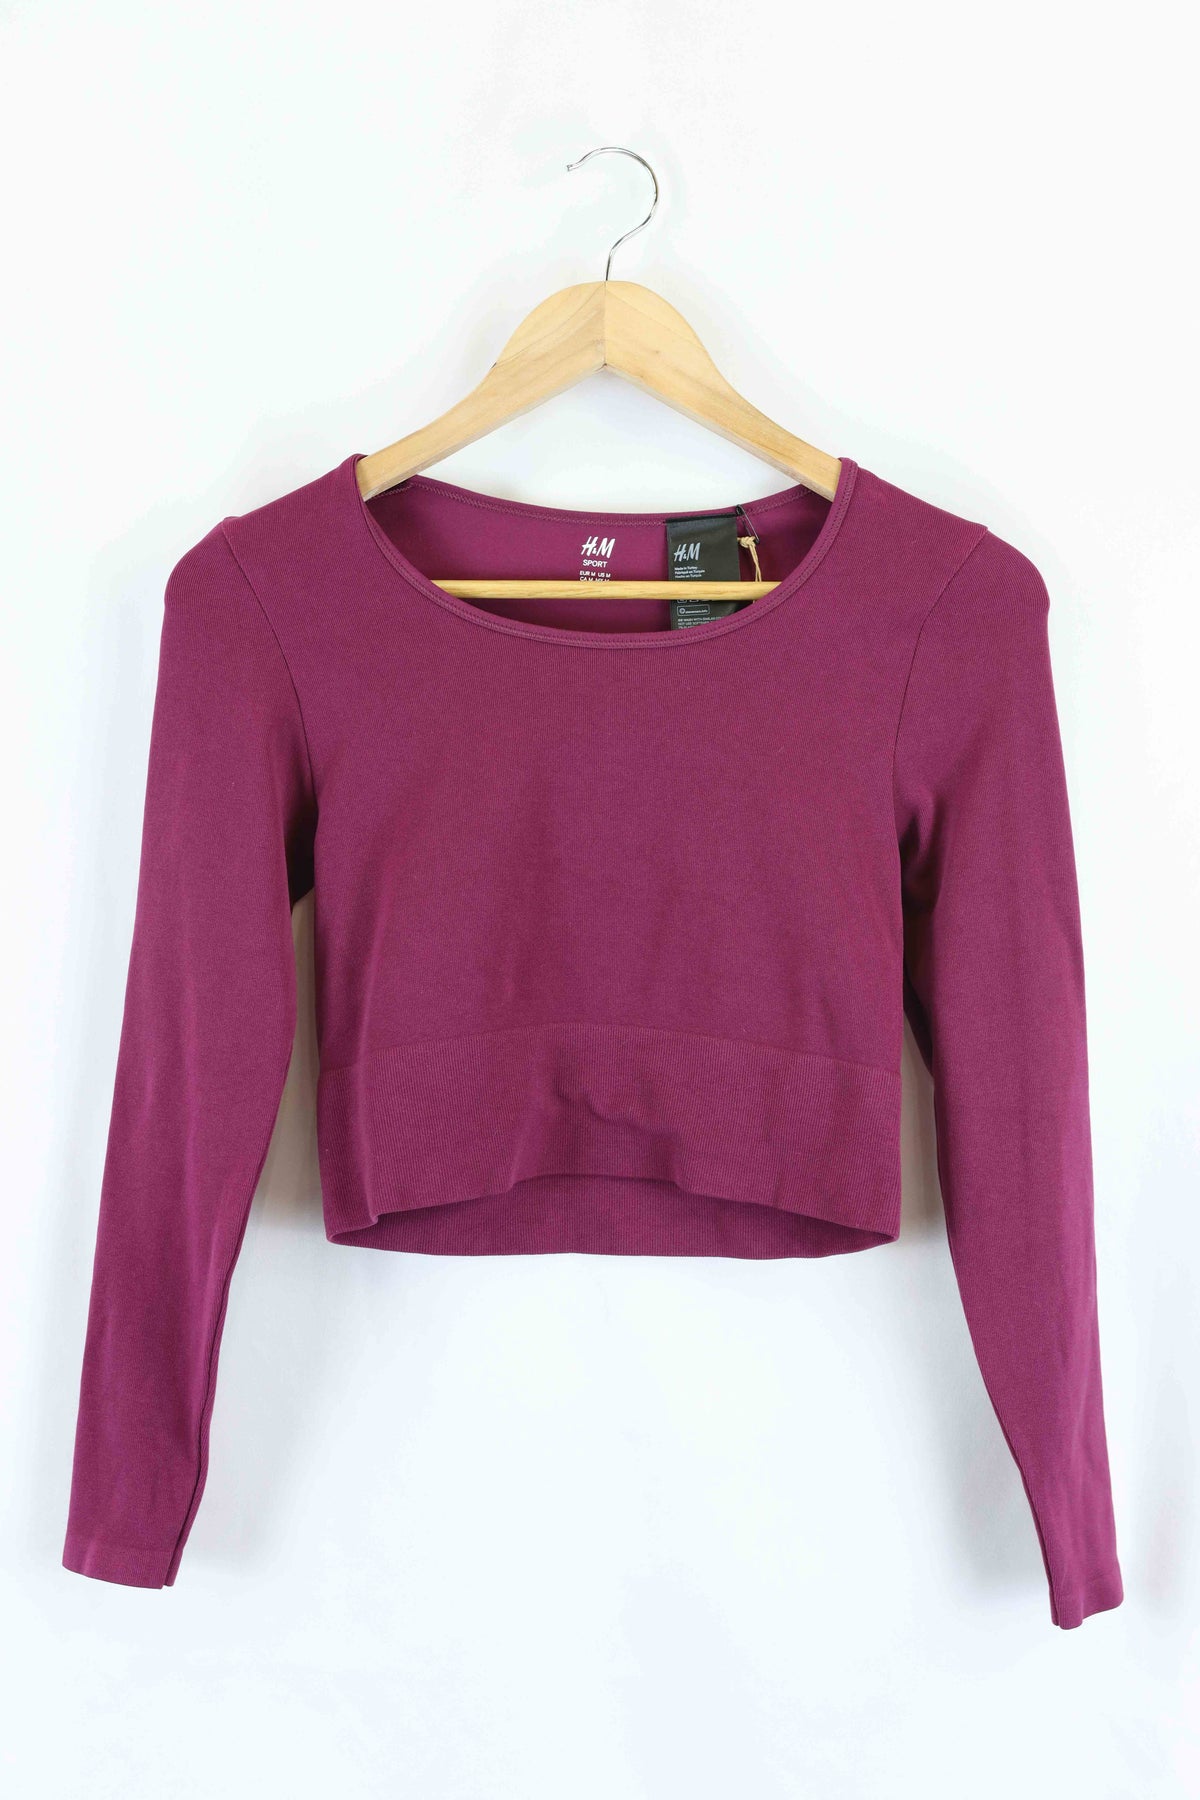 H&amp;M Purple Long Sleeve Cropped Top